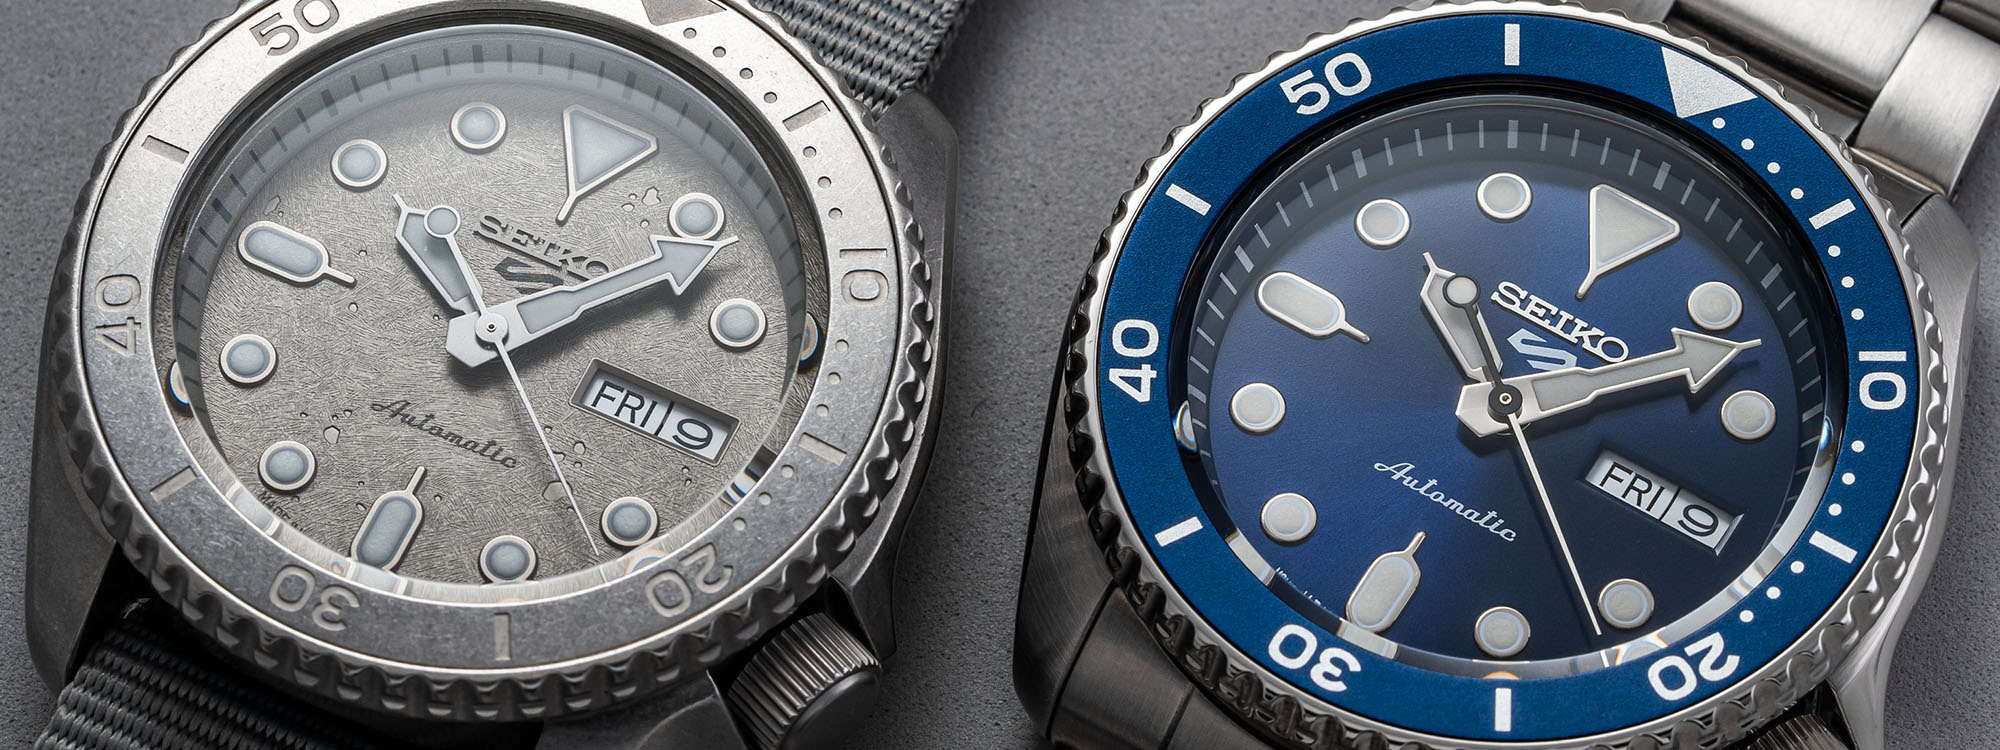 20 Seiko 5 Sports Watches: Affordable Divers, Dress Watches and Field | Baldassarre